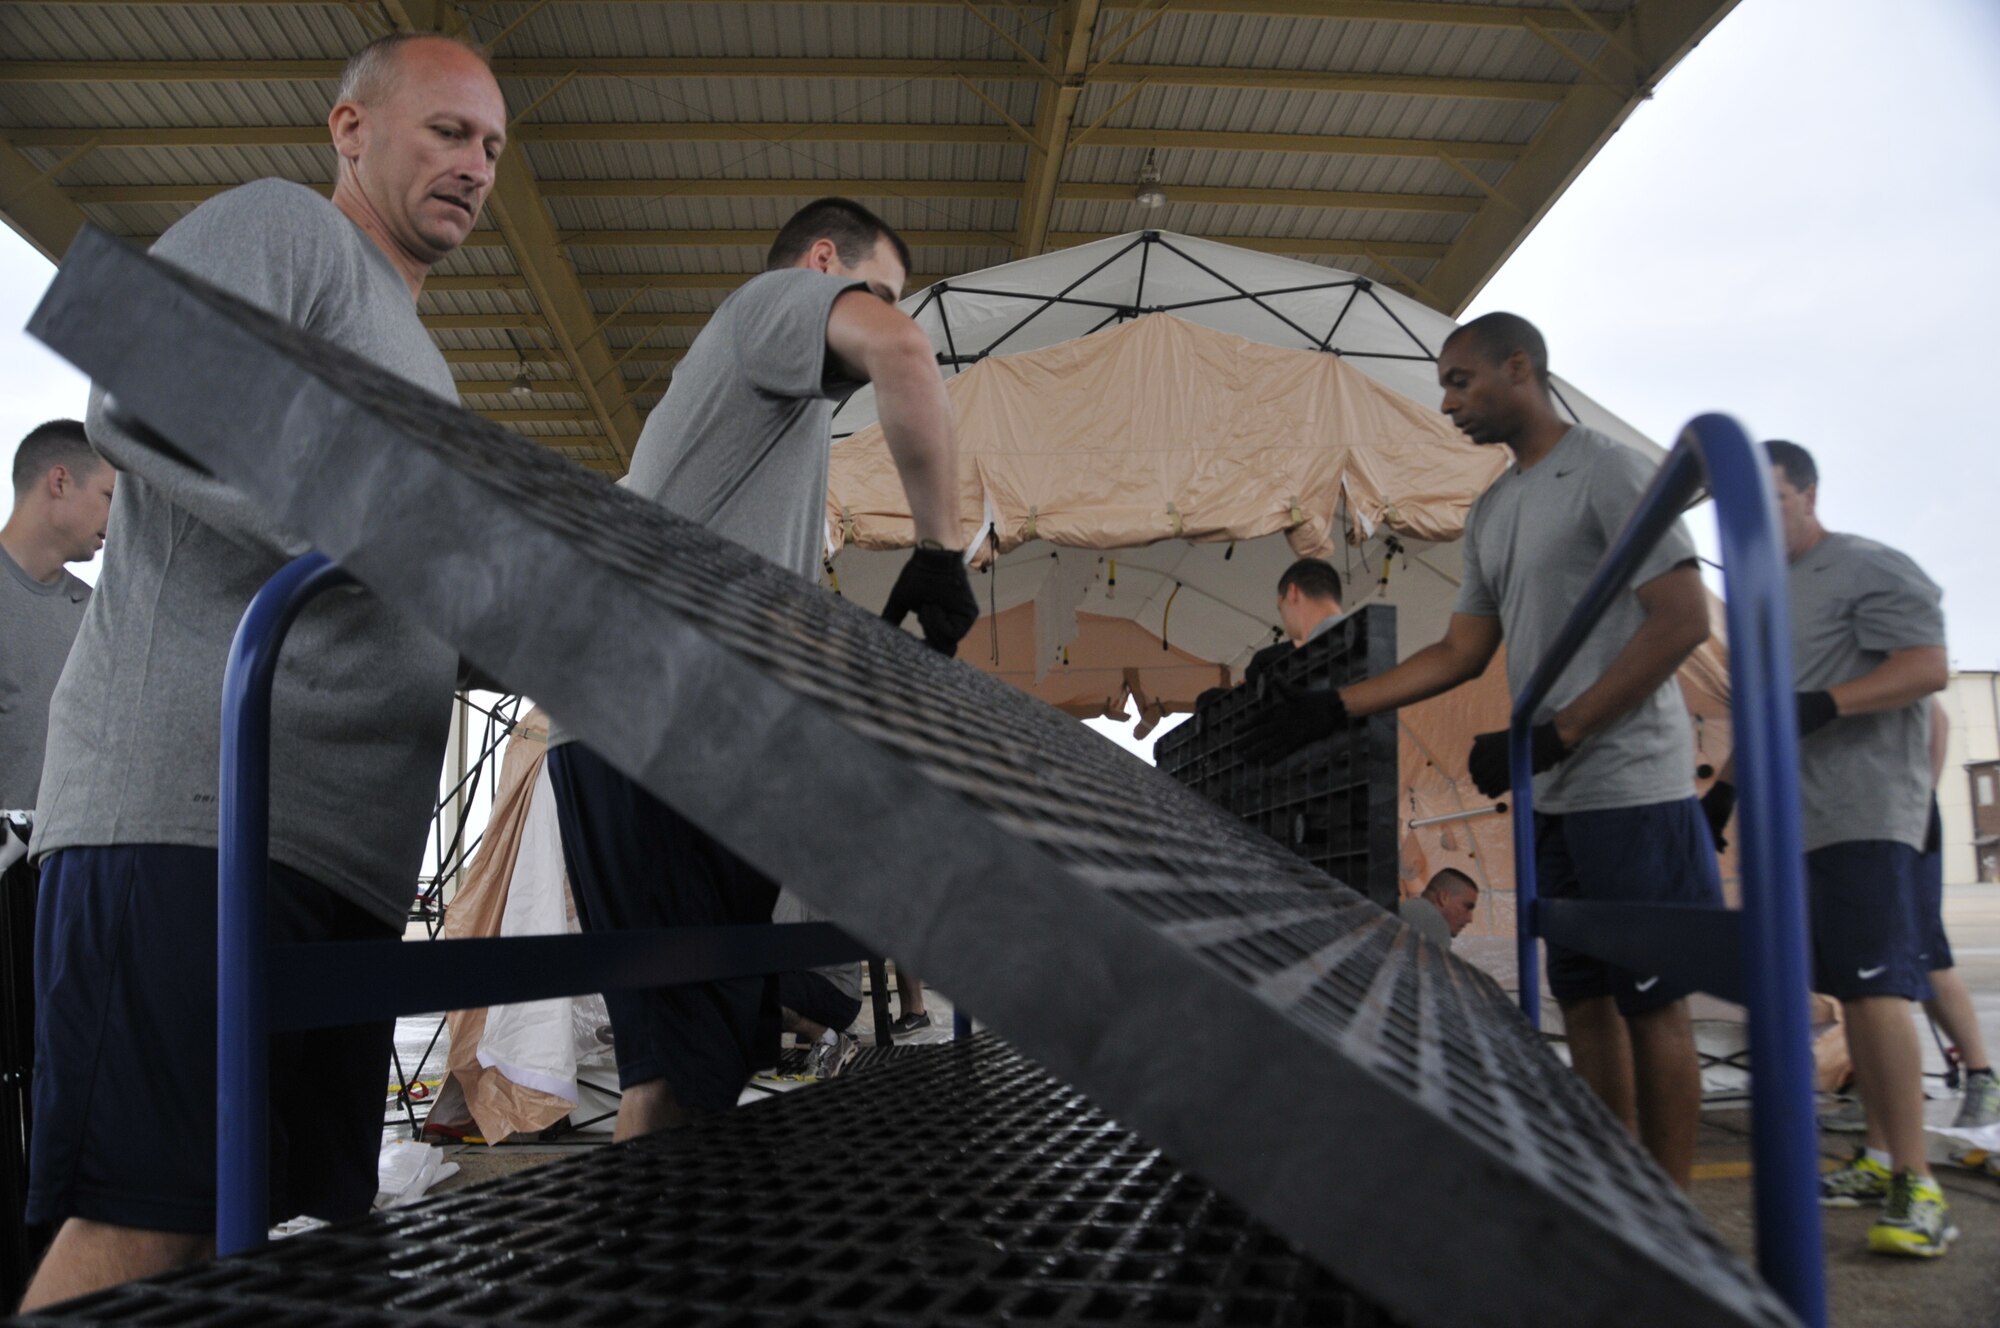 Airmen from the 188th Wing set up the flooring of a decontamination tent during a training event at Ebbing Air National Guard Base, Arkansas, July 17. The volunteers, who were from various parts of the wing, learned how to set up a decontamination tent and clean victims of various chemical or nuclear hazards. This training will aid the wing in its mission to support Arkansas citizens in times of disaster. (U.S. Air National Guard photo by Staff Sgt. John Suleski/released)